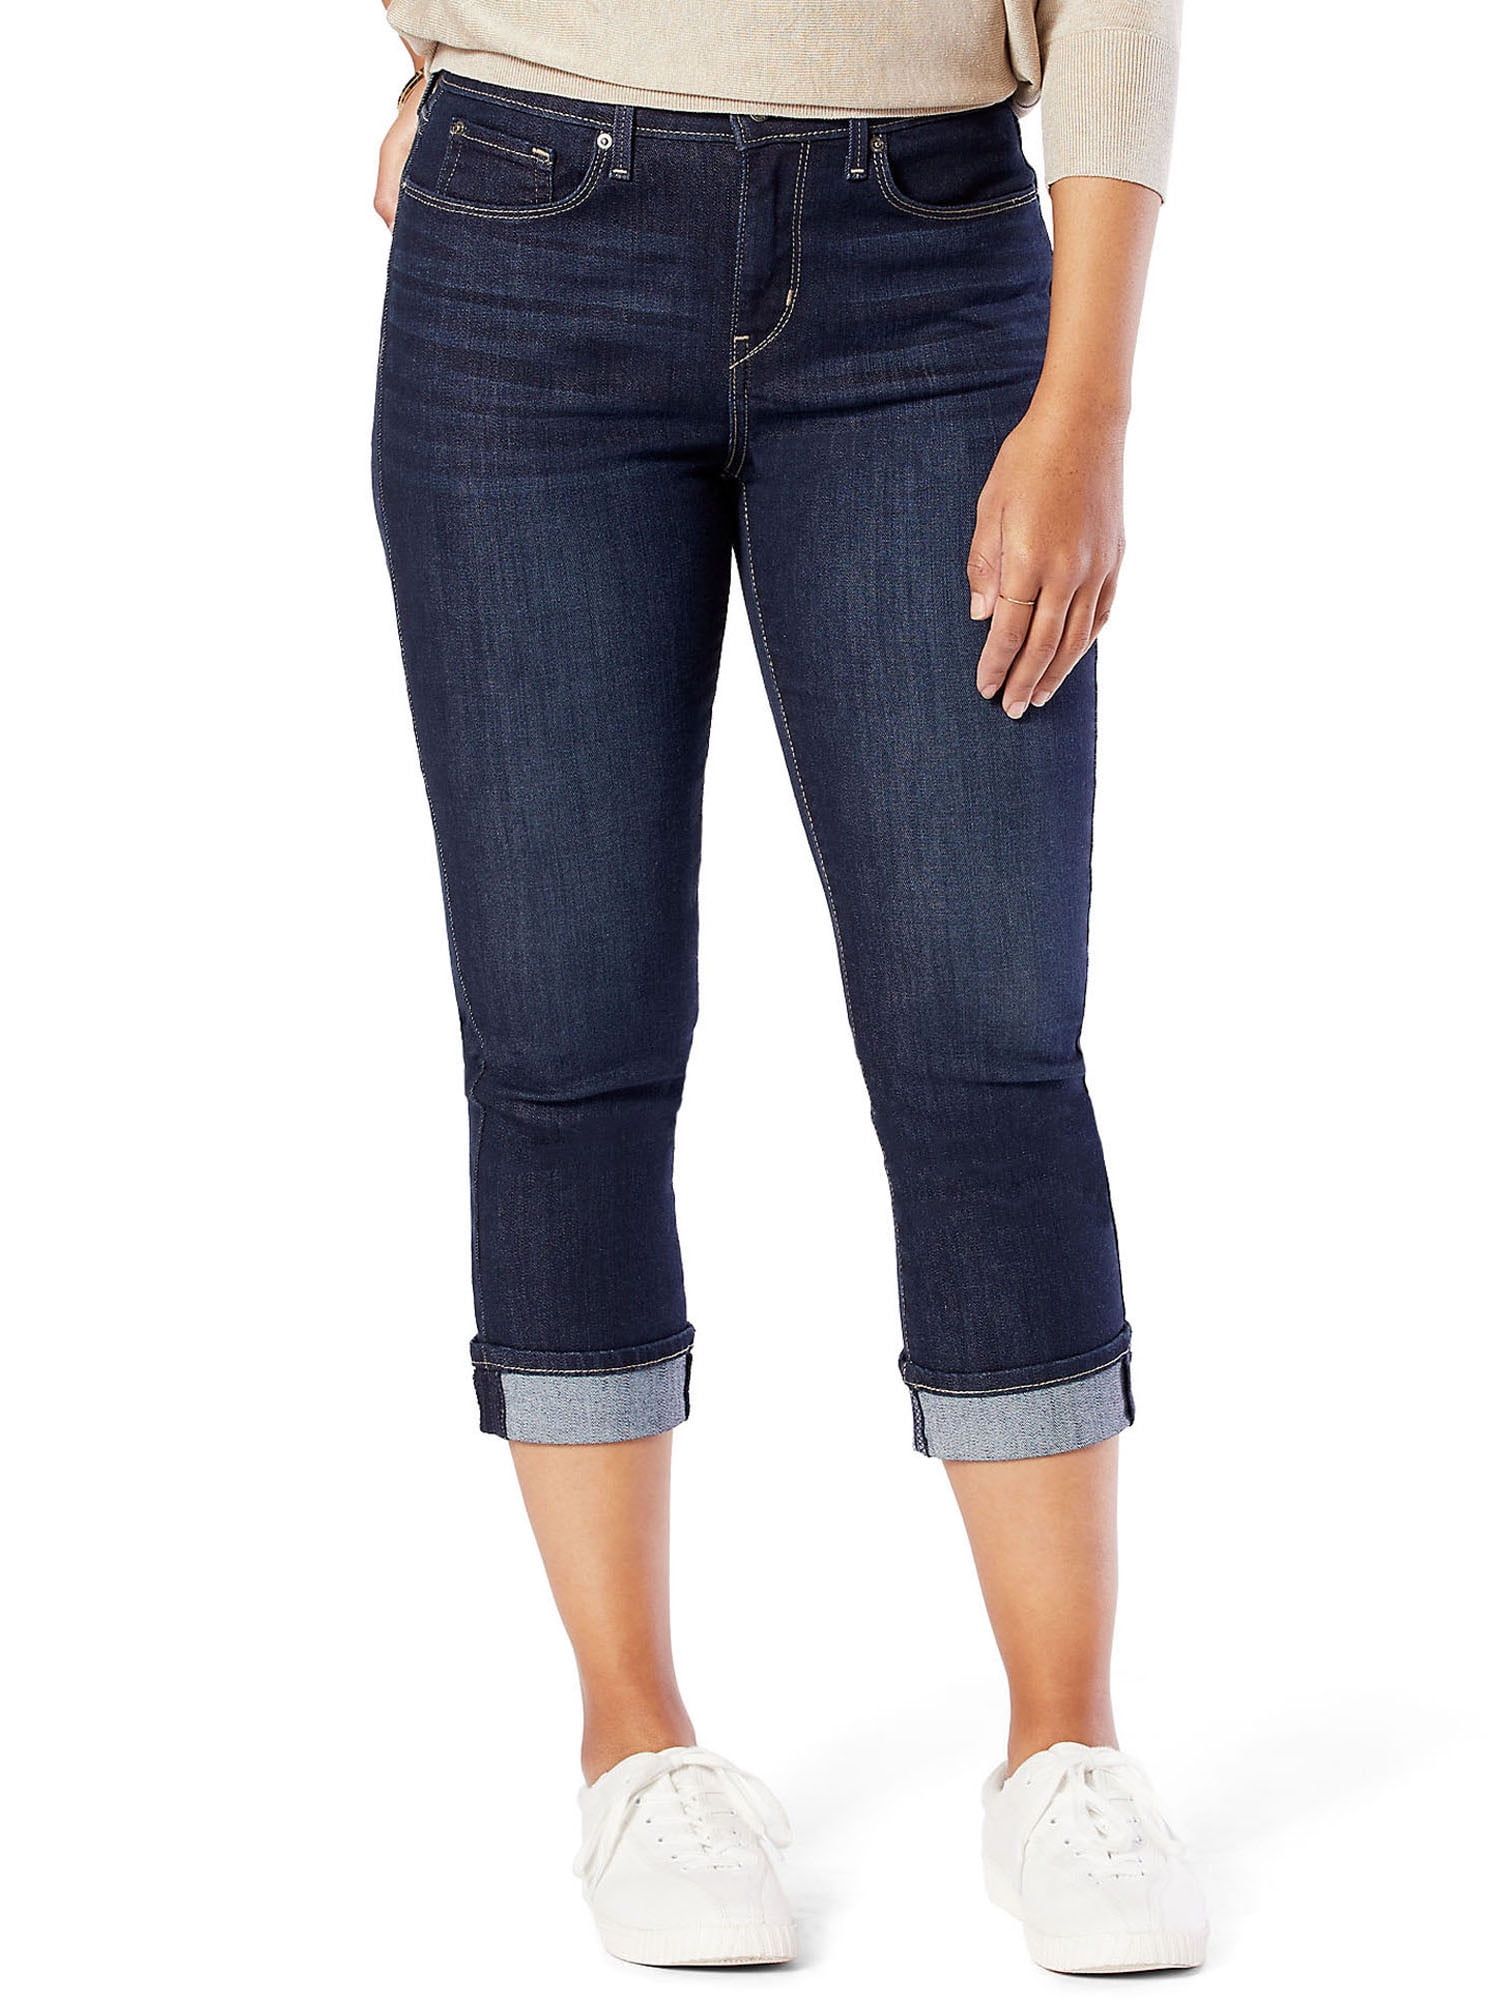 Signature by Levi Strauss & Co. Women\'s Mid Rise Capri Jeans